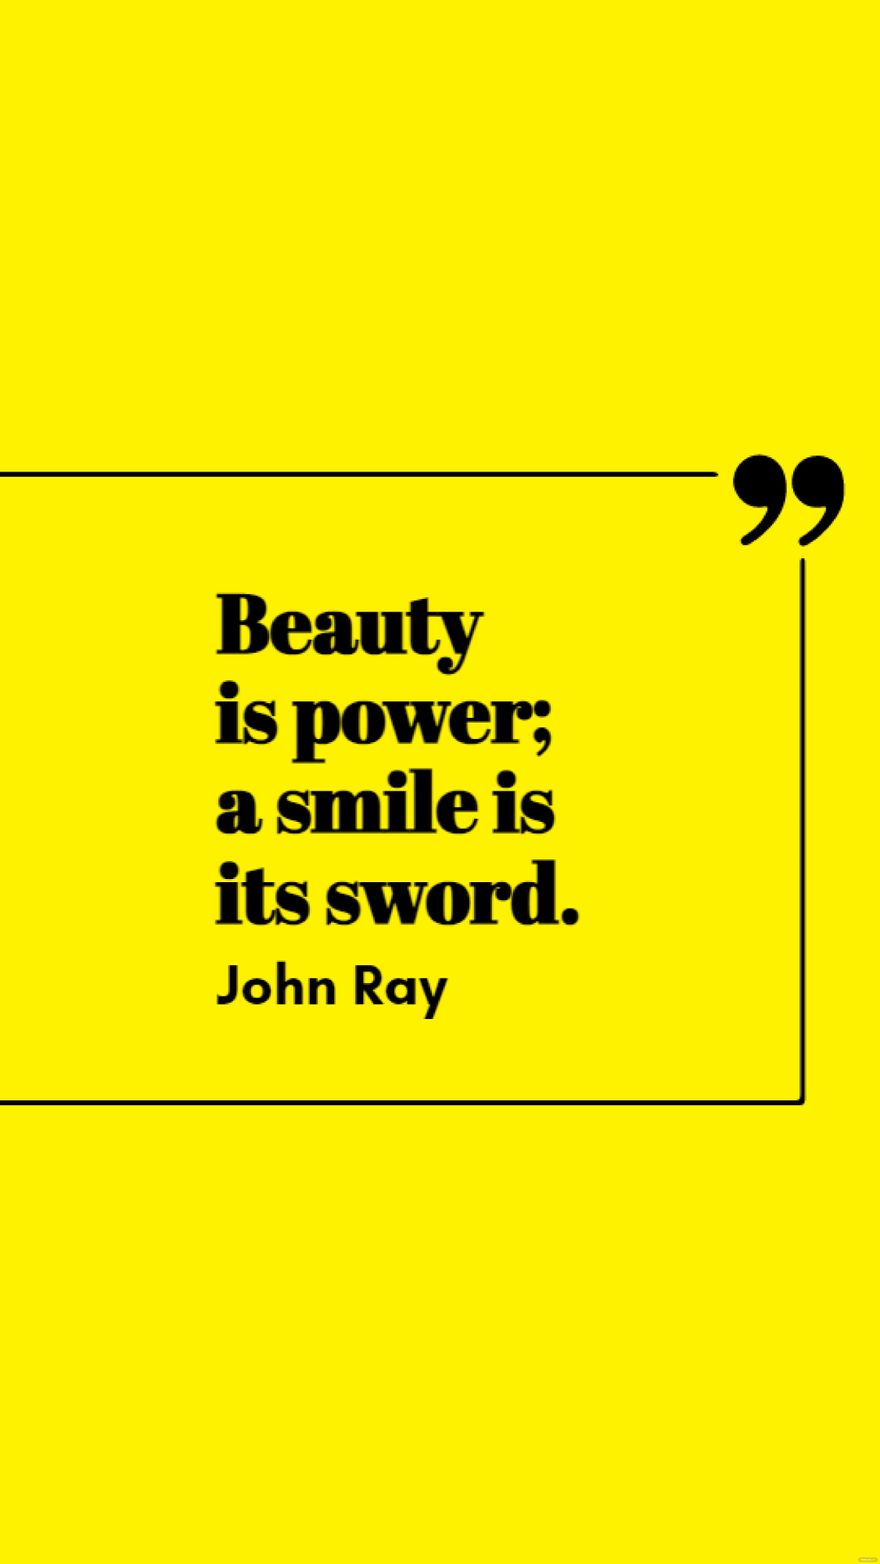 John Ray - Beauty is power; a smile is its sword.